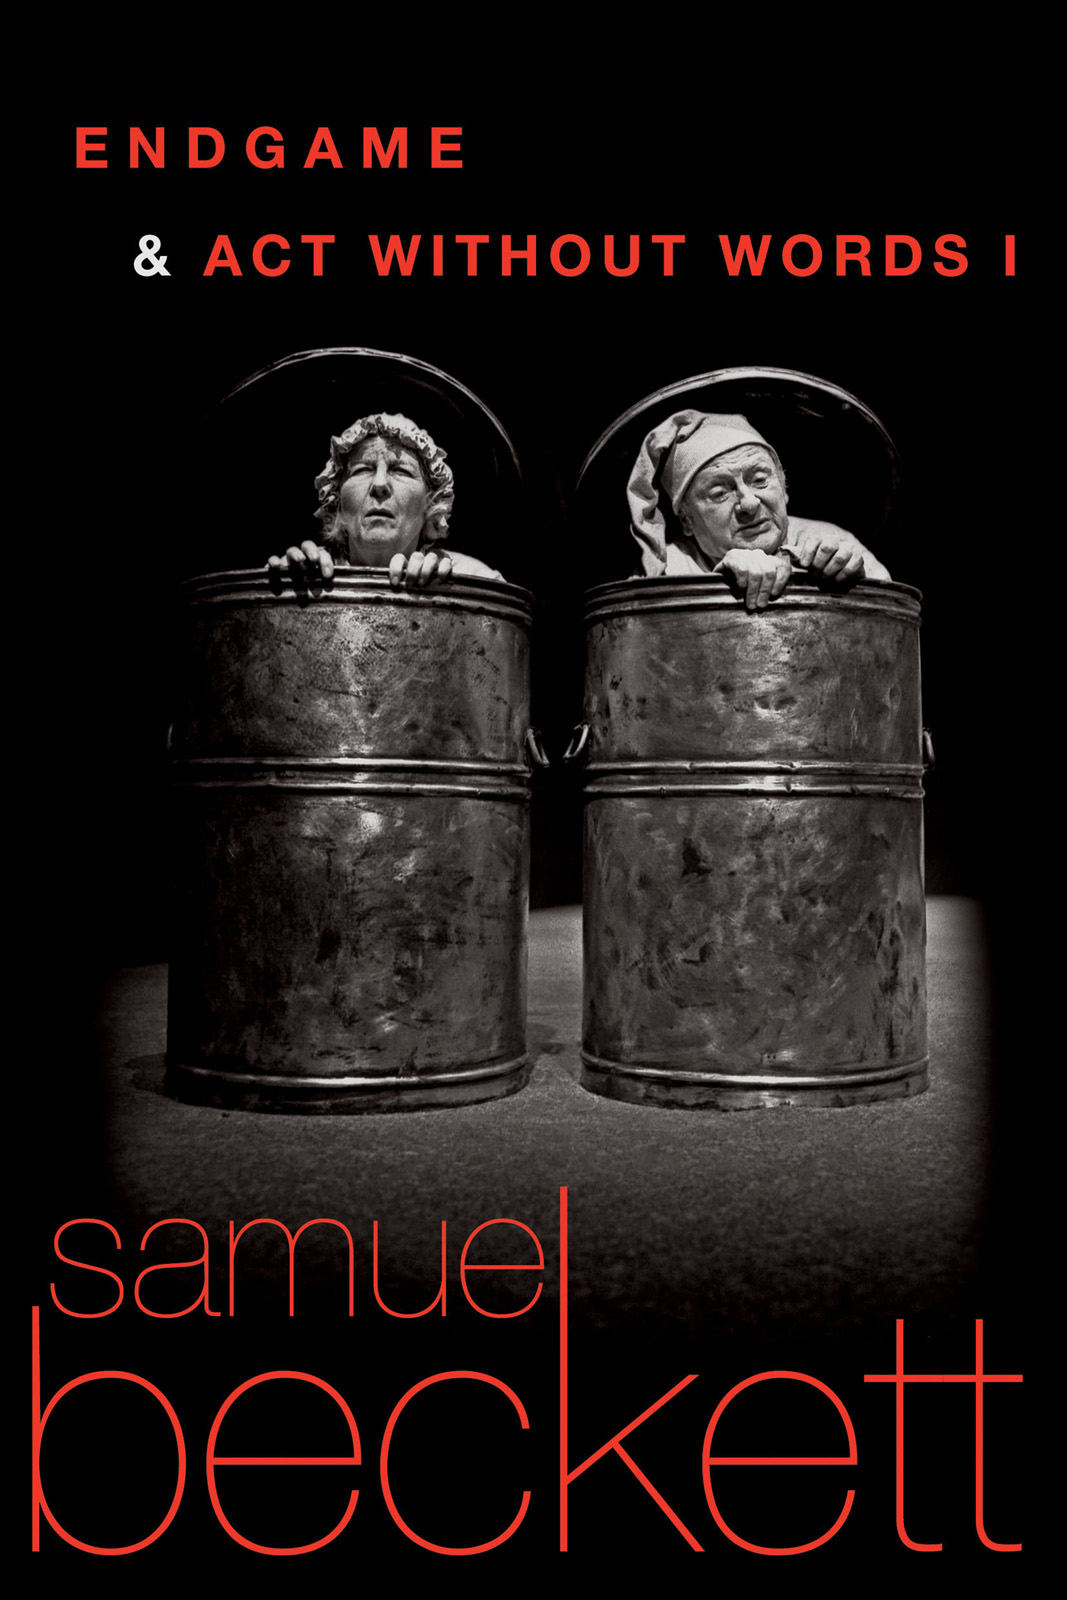 Endgame Act Without Words I (1957) by Samuel Beckett